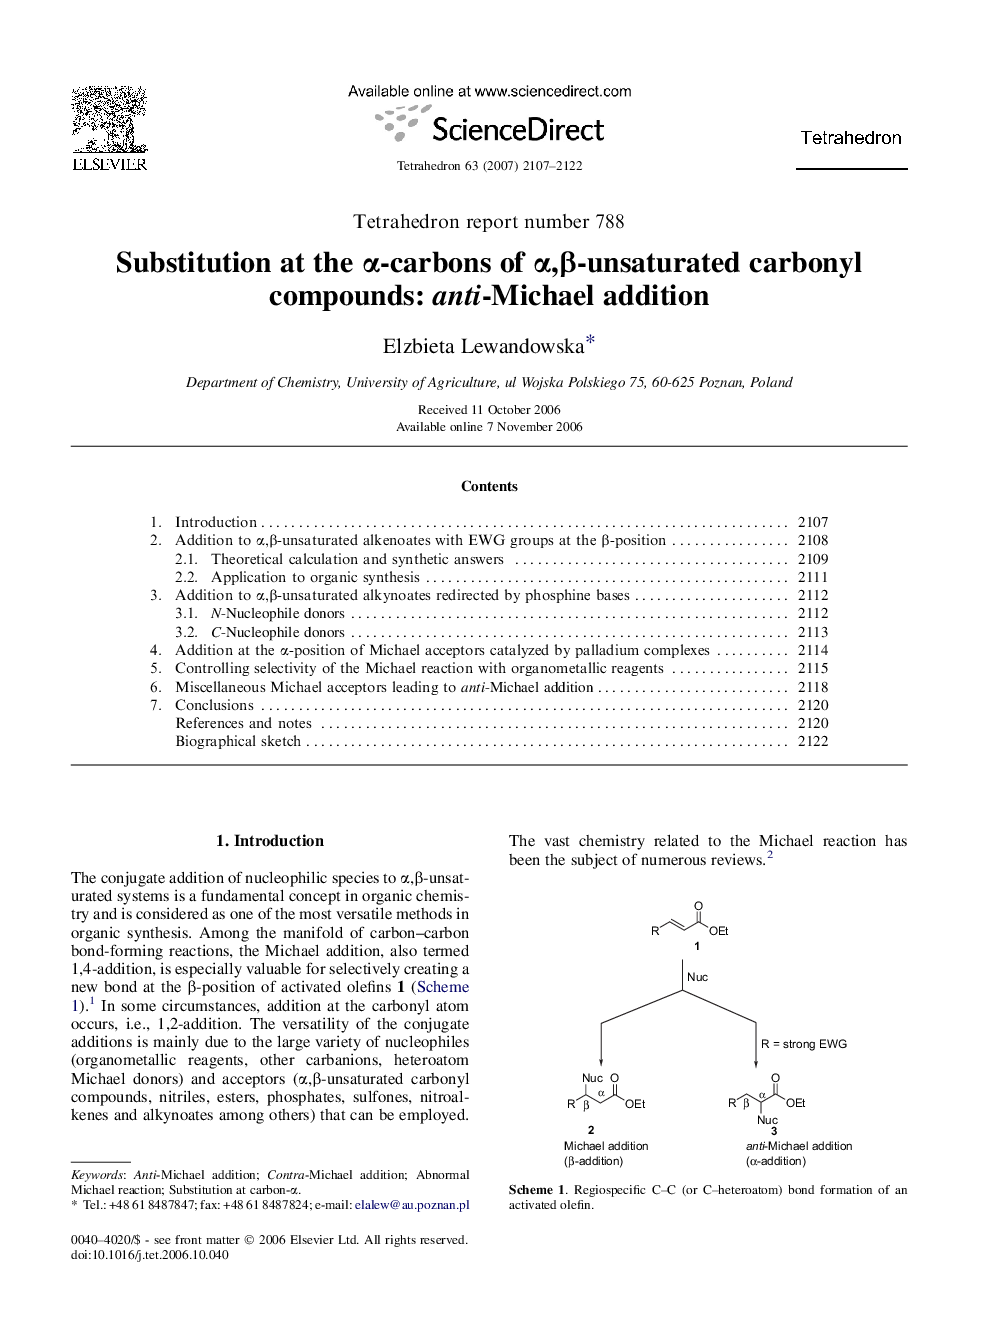 Substitution at the Î±-carbons of Î±,Î²-unsaturated carbonyl compounds: anti-Michael addition